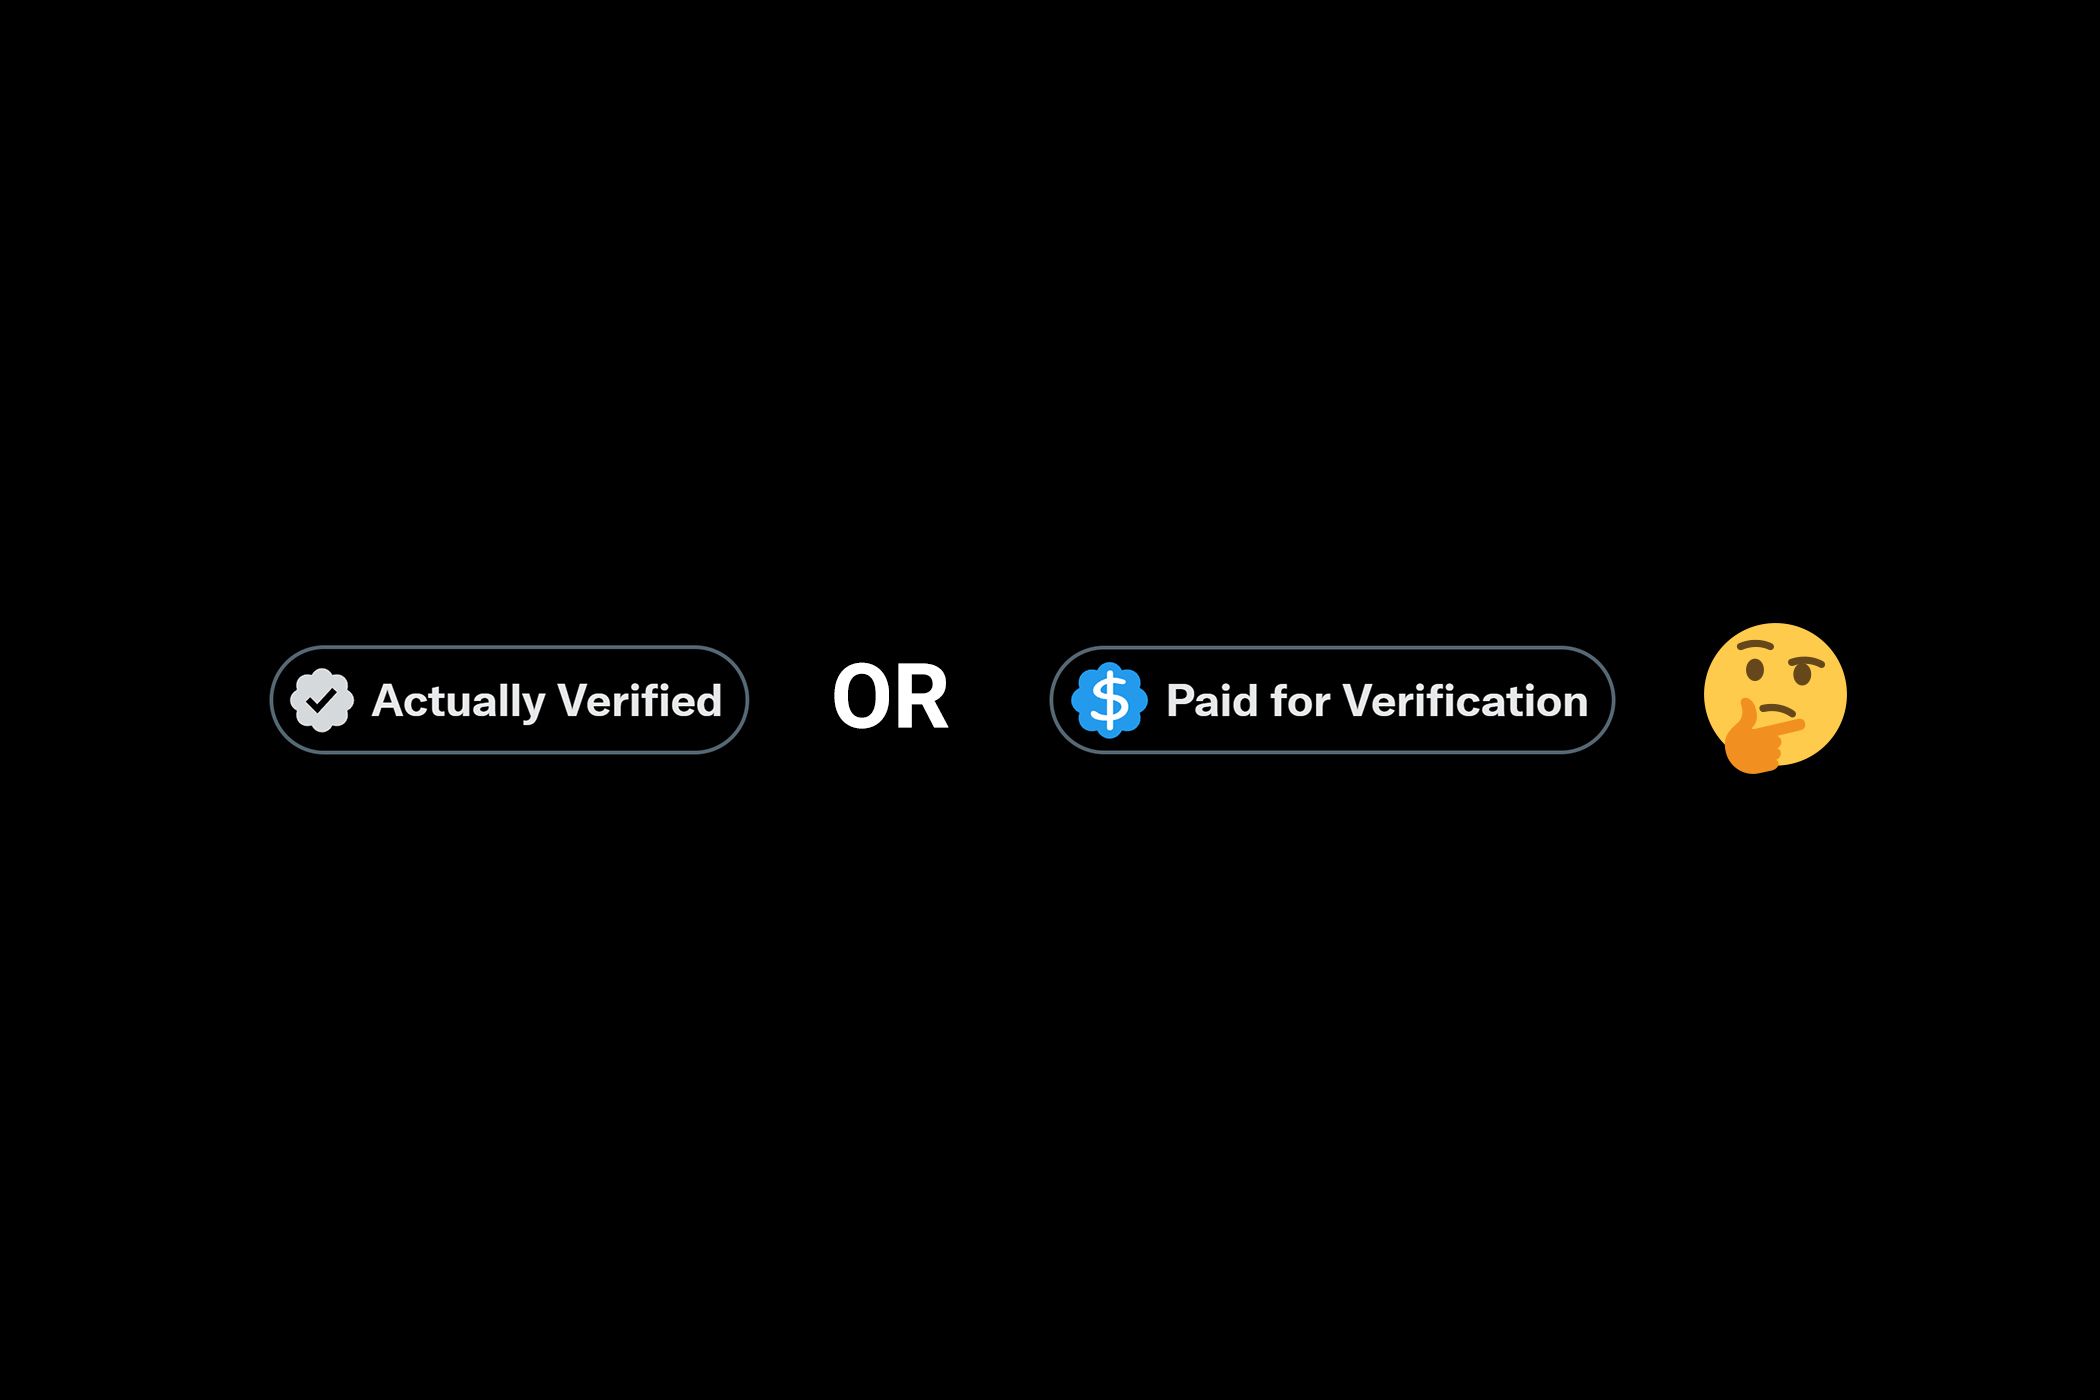 How to Tell If a Twitter Account Is Actually Verified